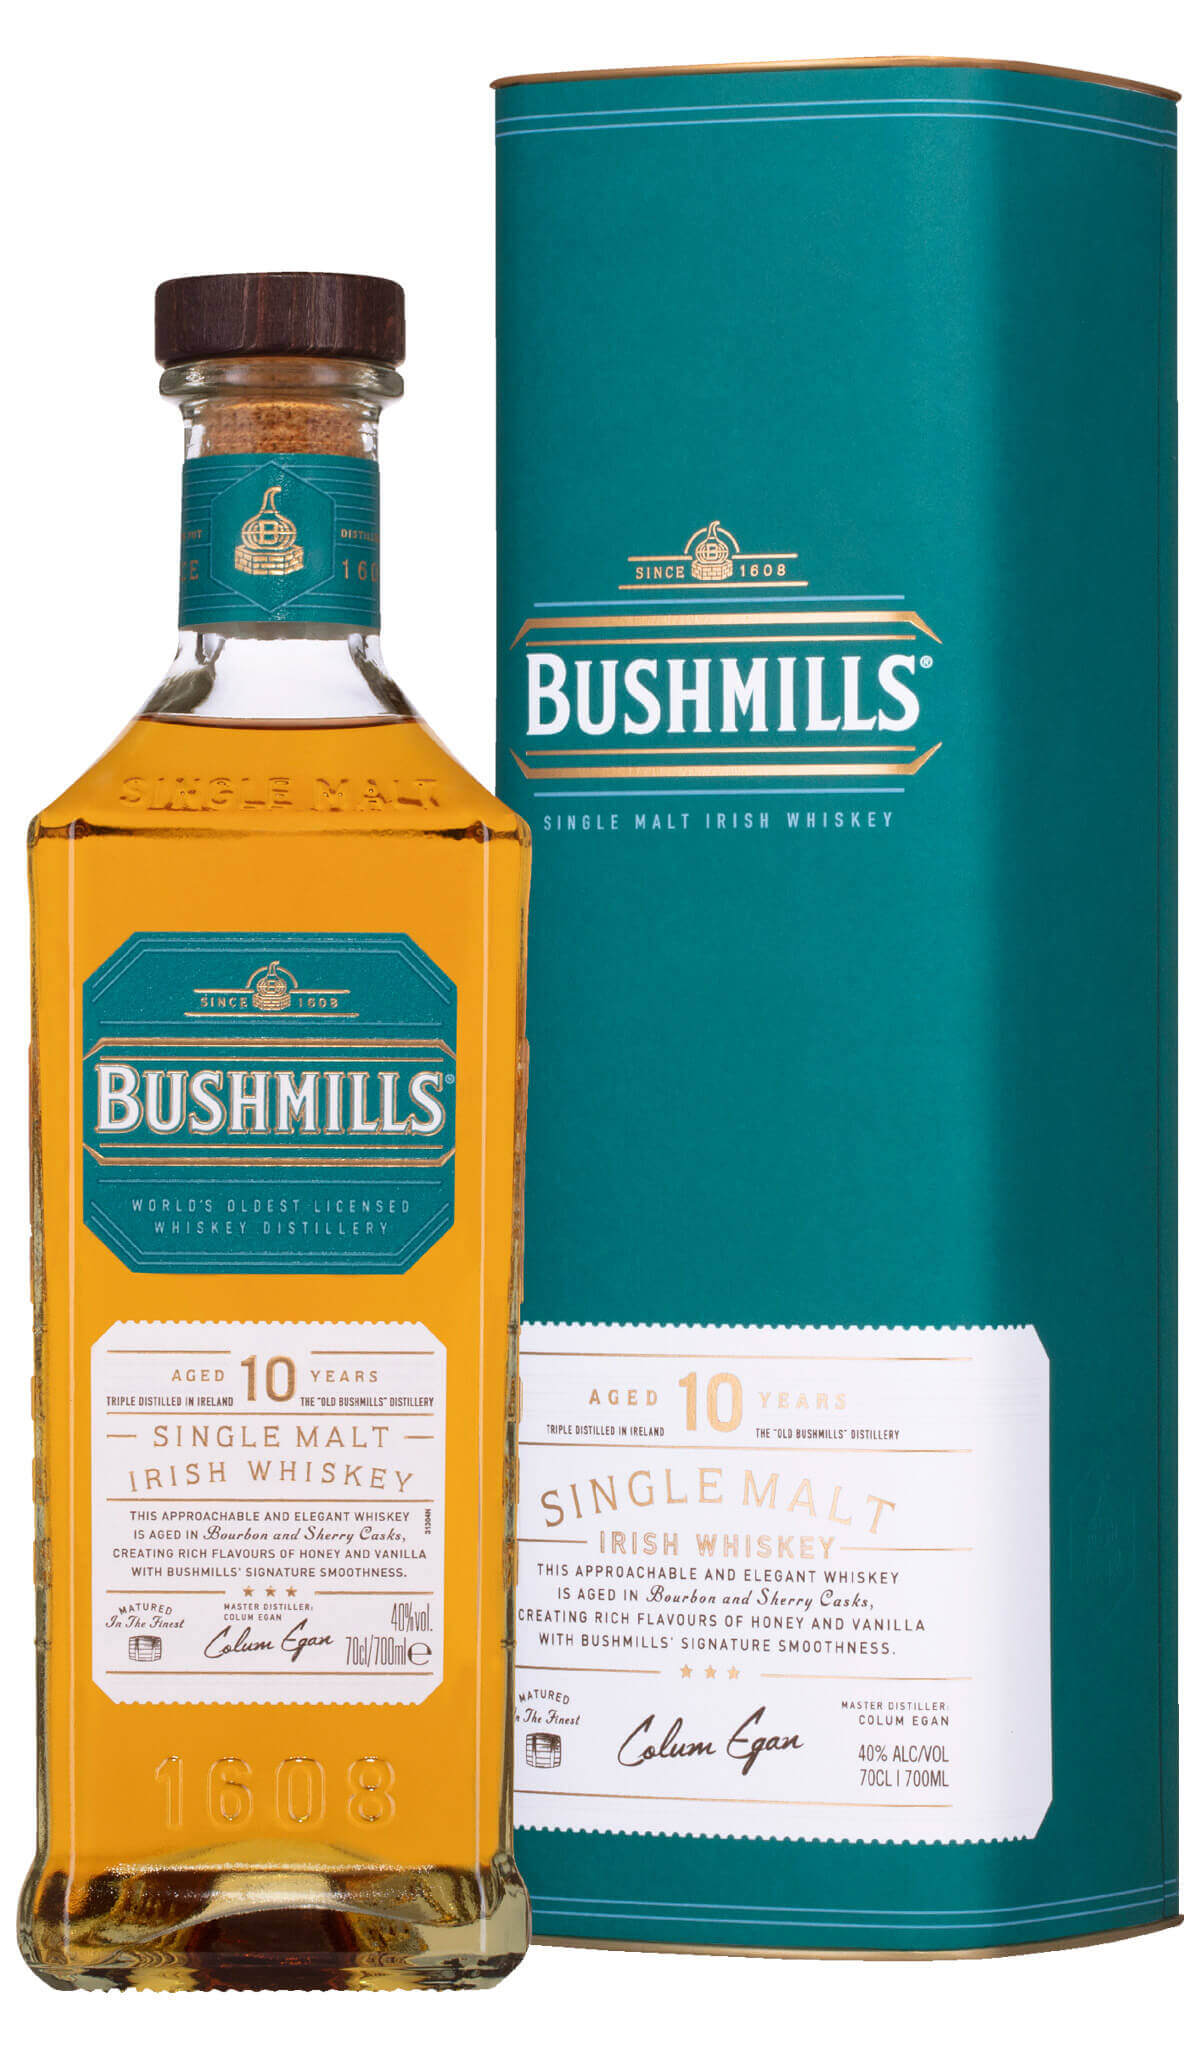 Find out more or buy Bushmills Single Malt 10 Year Irish Whiskey 700ml online at Wine Sellers Direct - Australia’s independent liquor specialists.